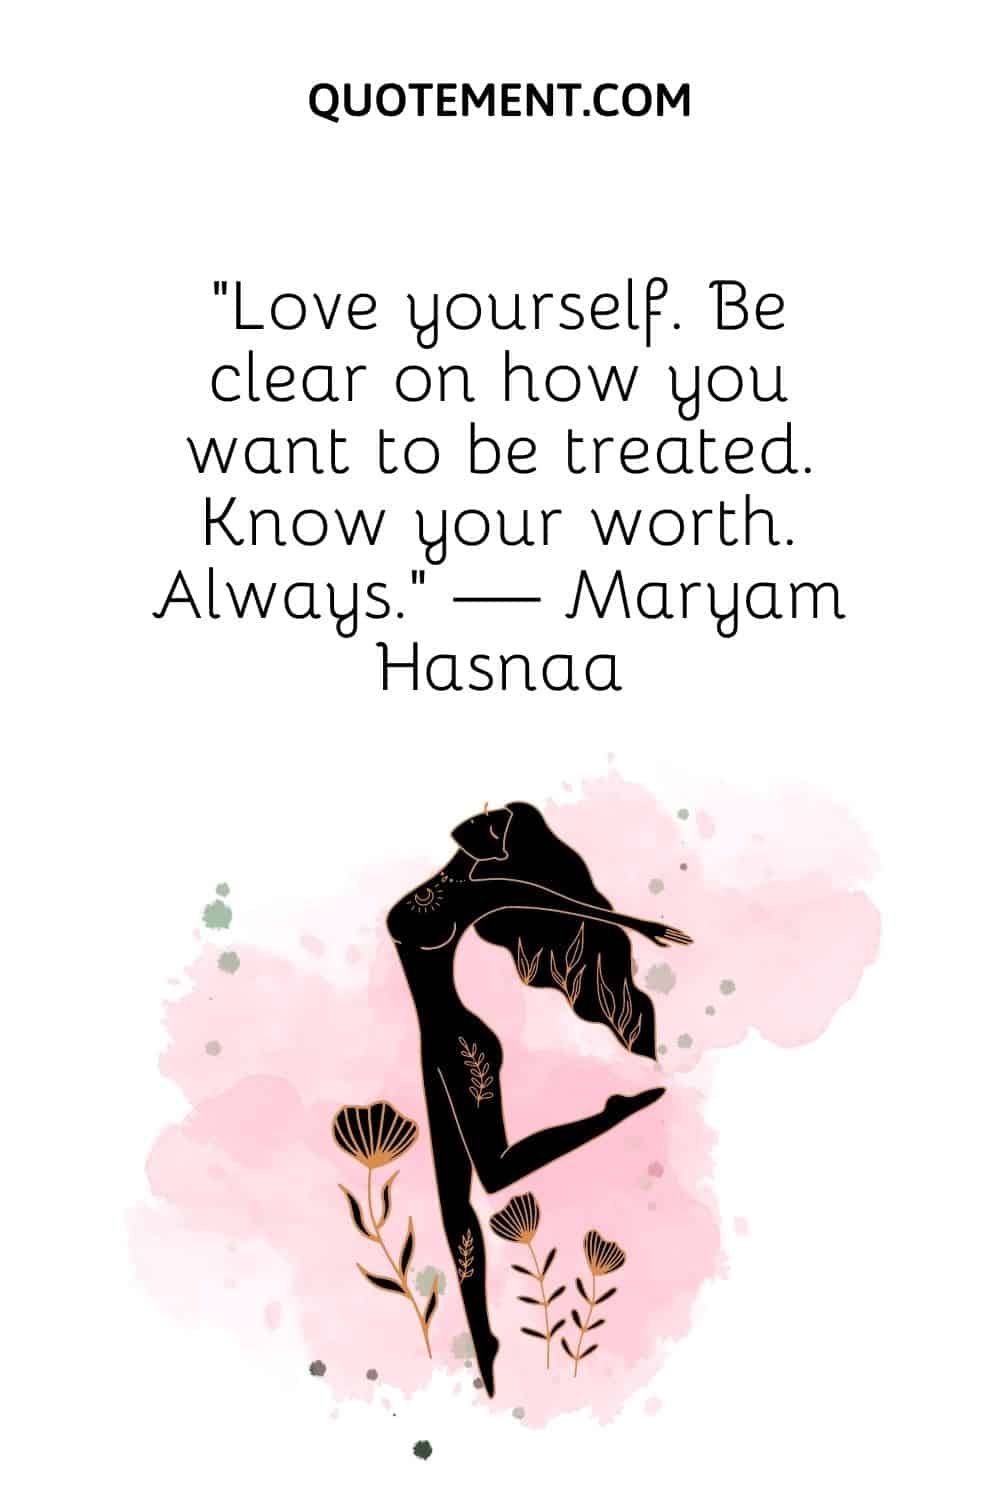 Love yourself. Be clear on how you want to be treated.